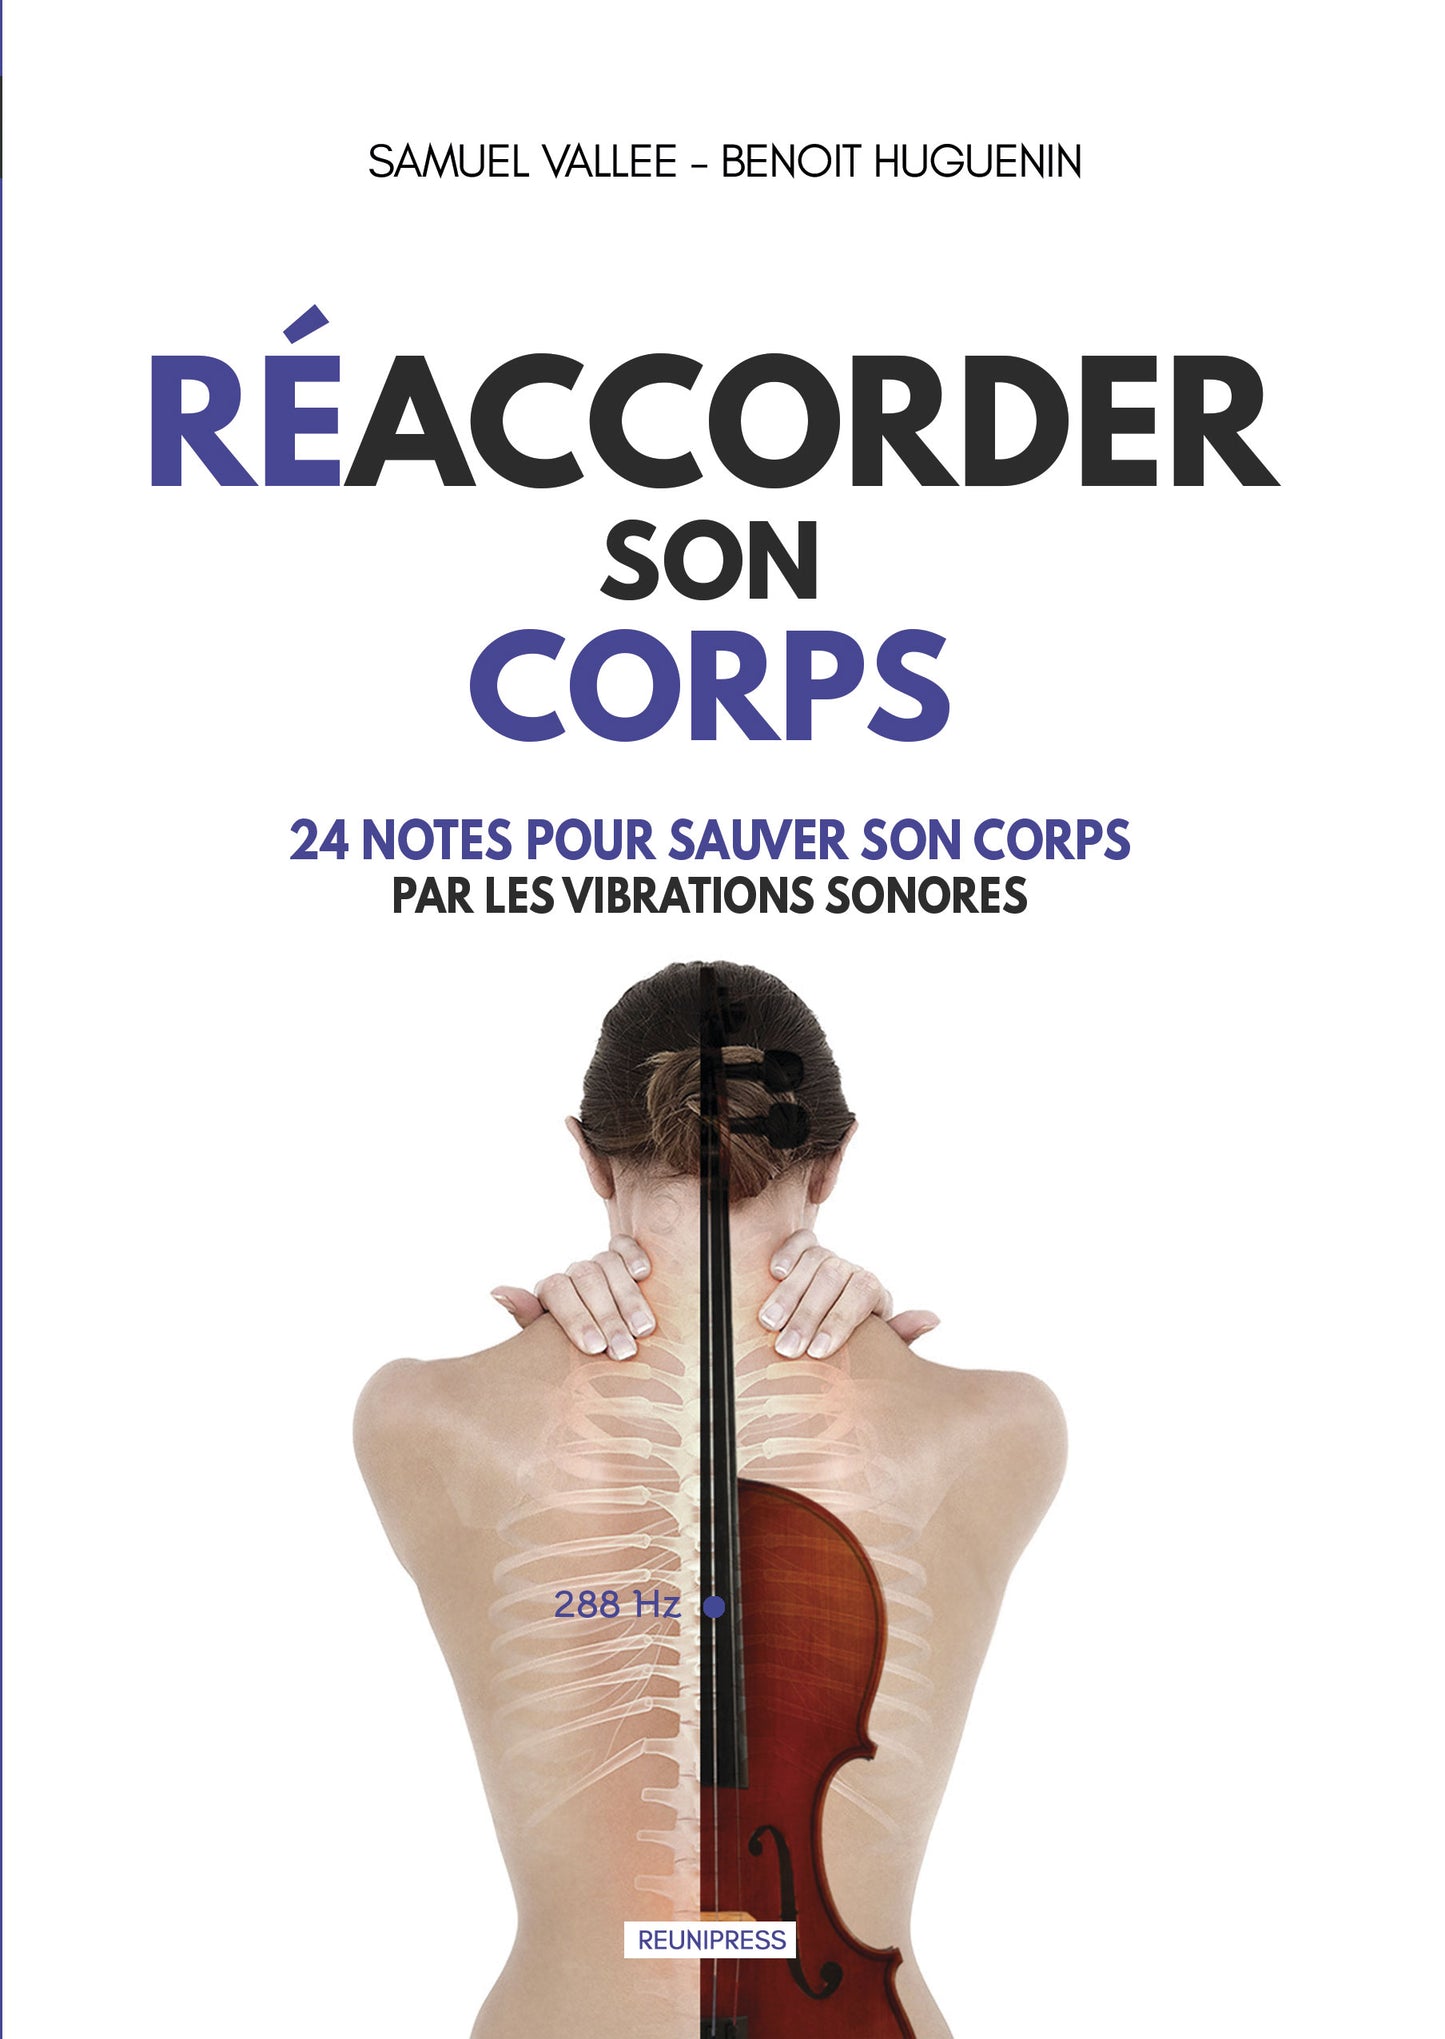 Réaccorder son Corps